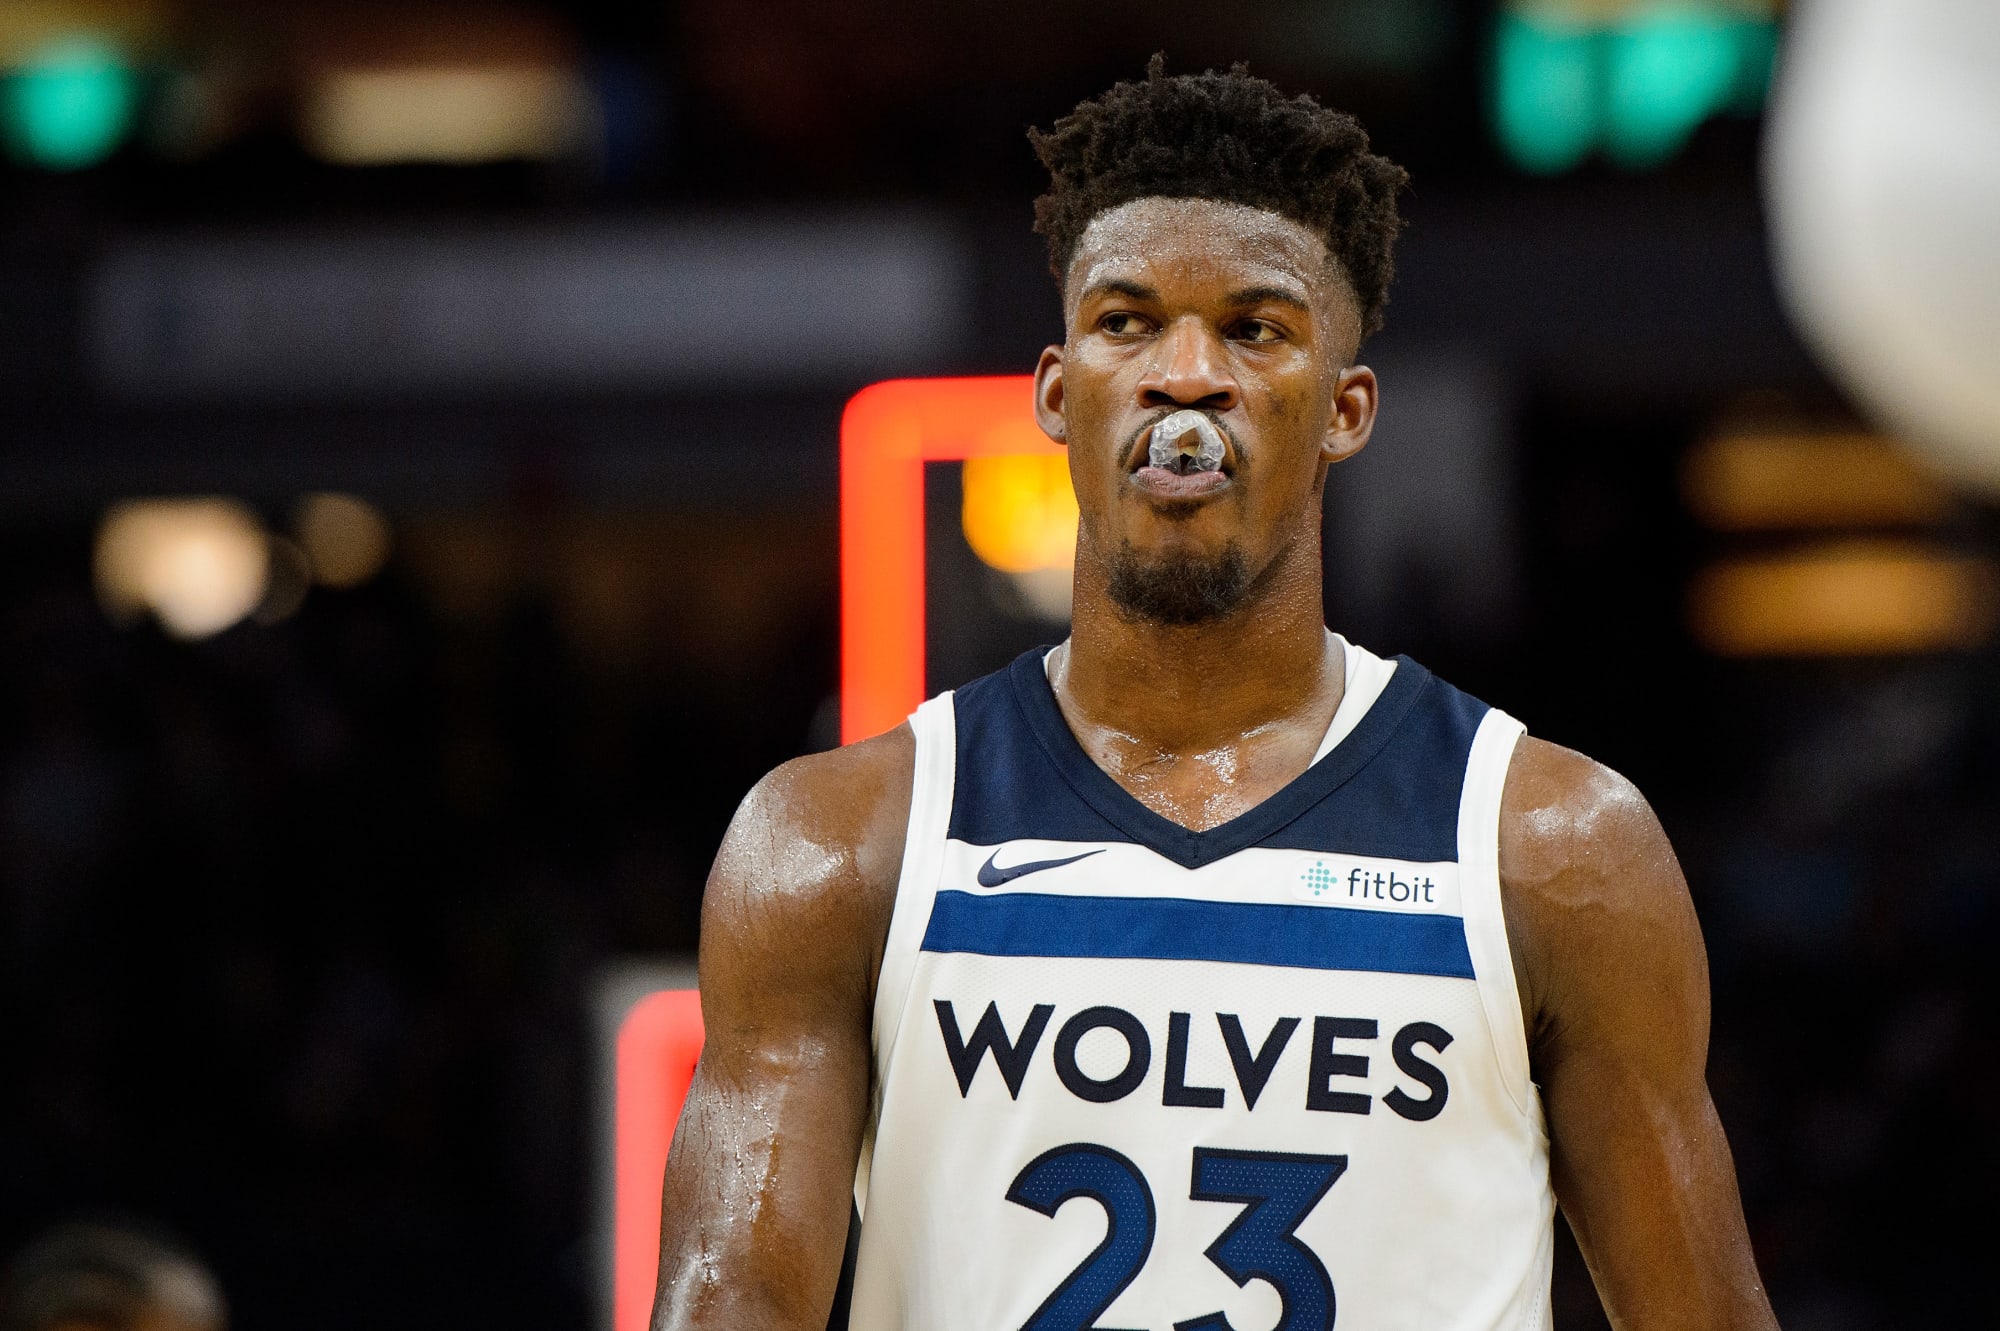 The Timberwolves final jersey design appears to have been delayed